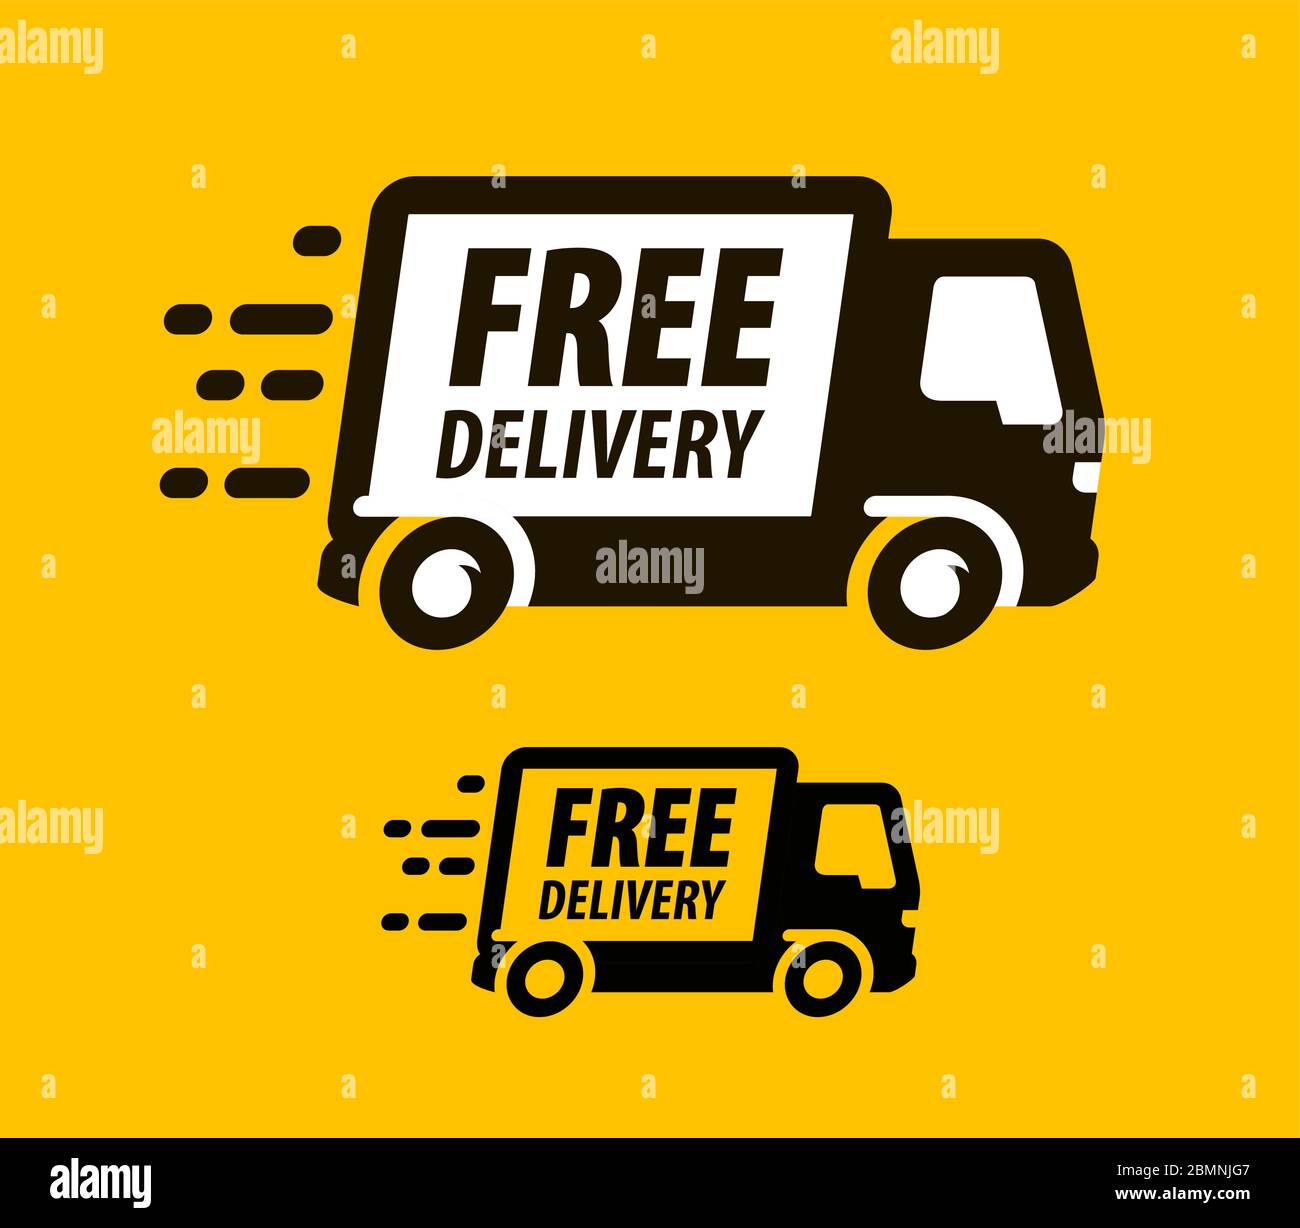 Free delivery symbol. Truck, freight transportation icon or symbol. Vector illustration Stock Vector